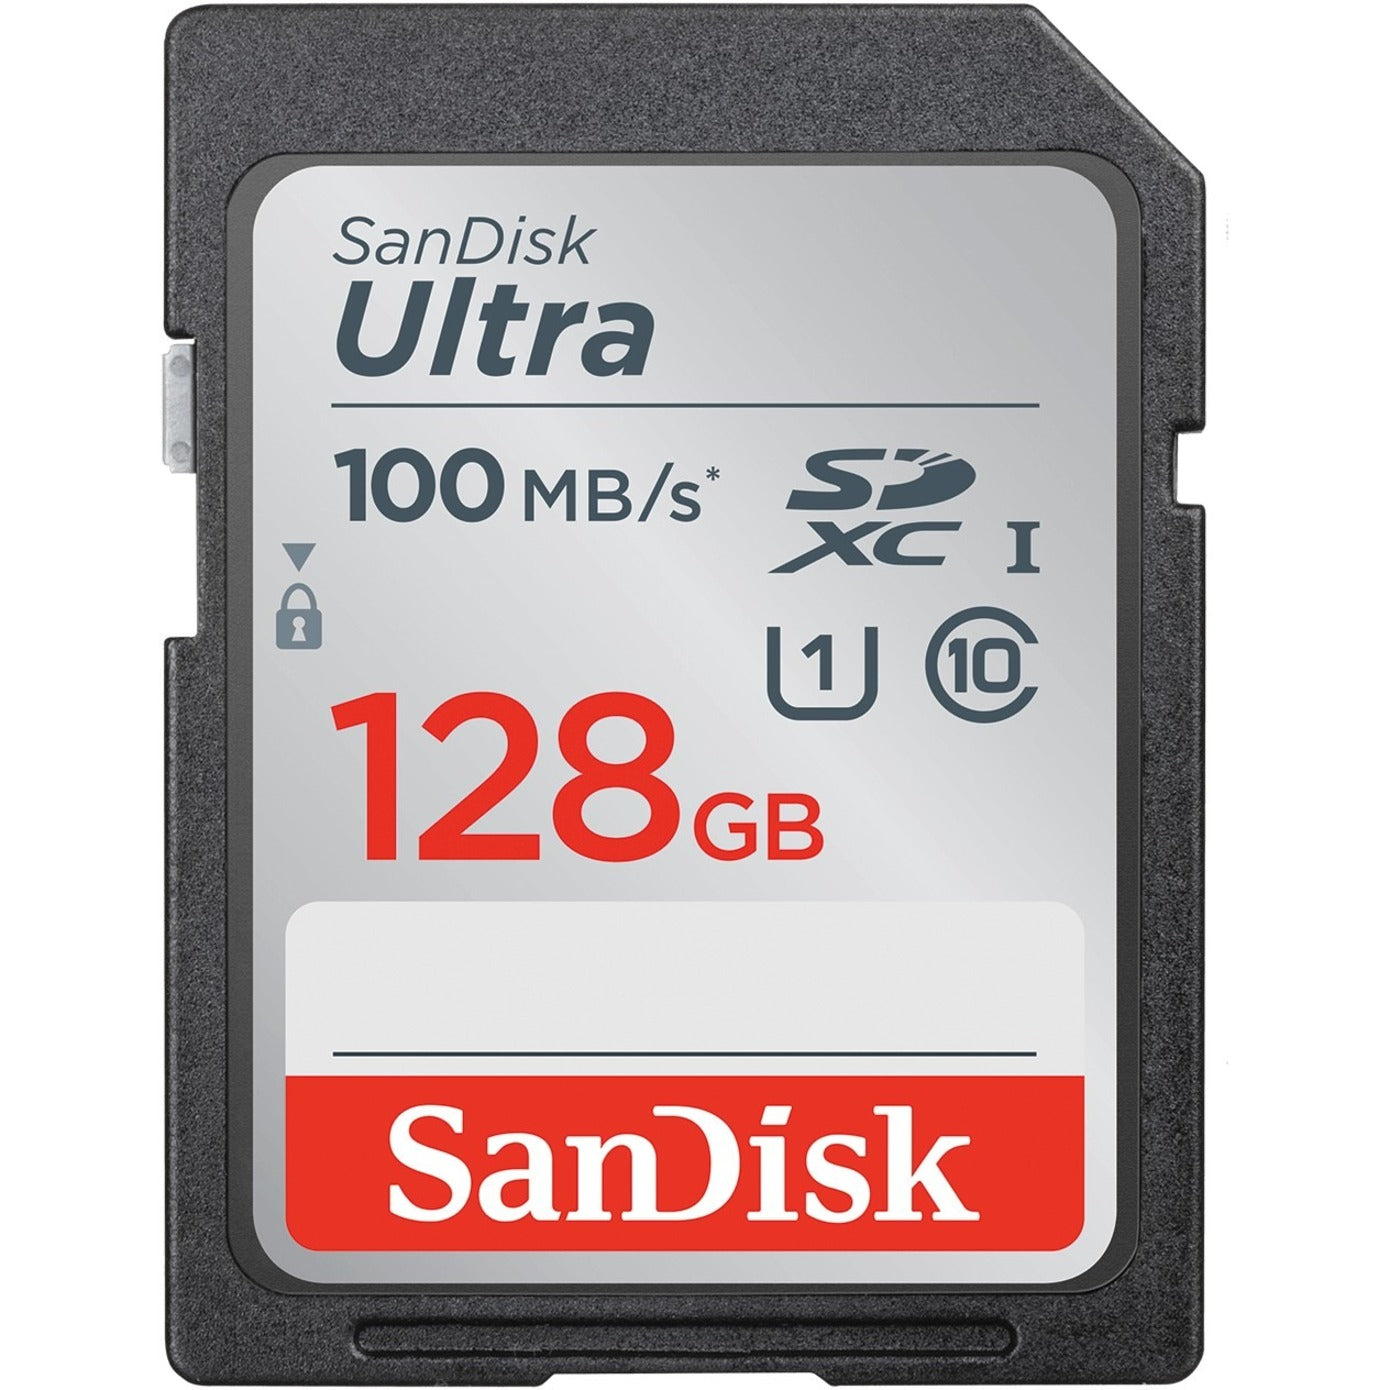 SanDisk Ultra 128GB UHS-I SDXC Memory Card [Discontinued]